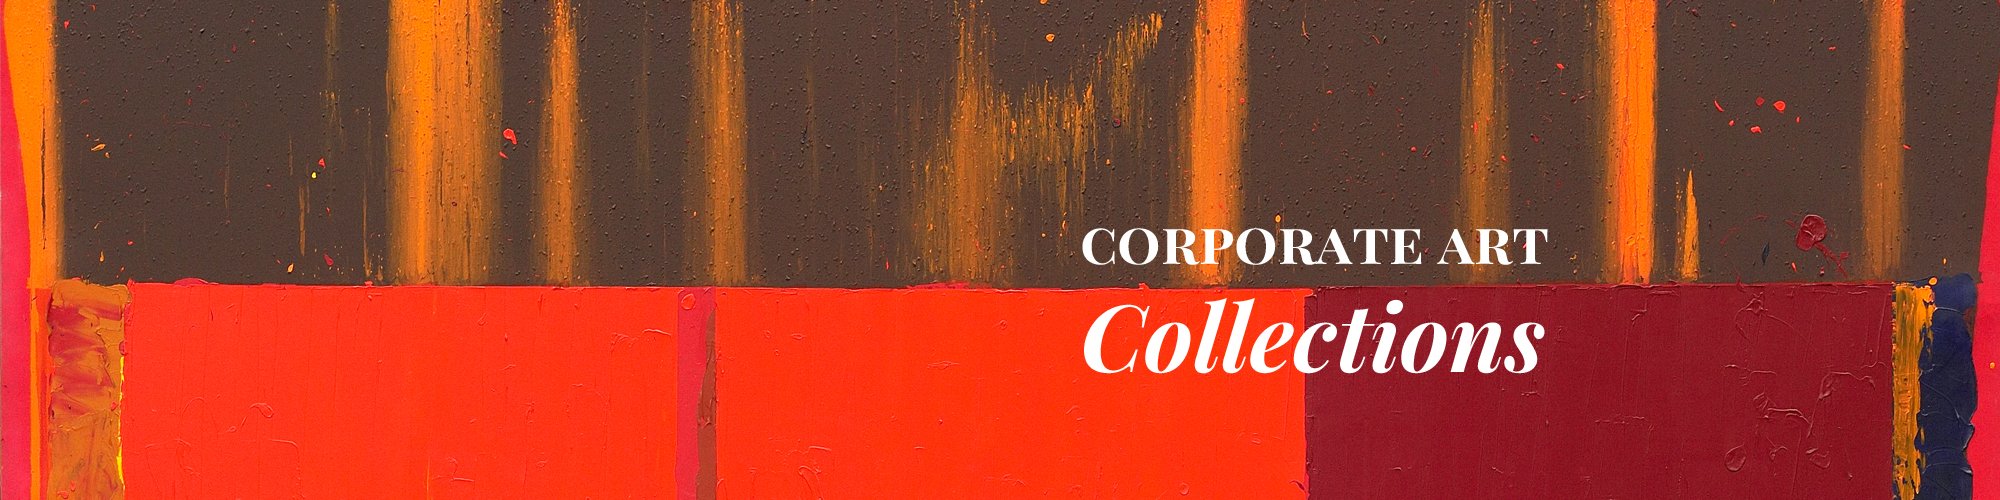 Invest in Corporate Art Collections?